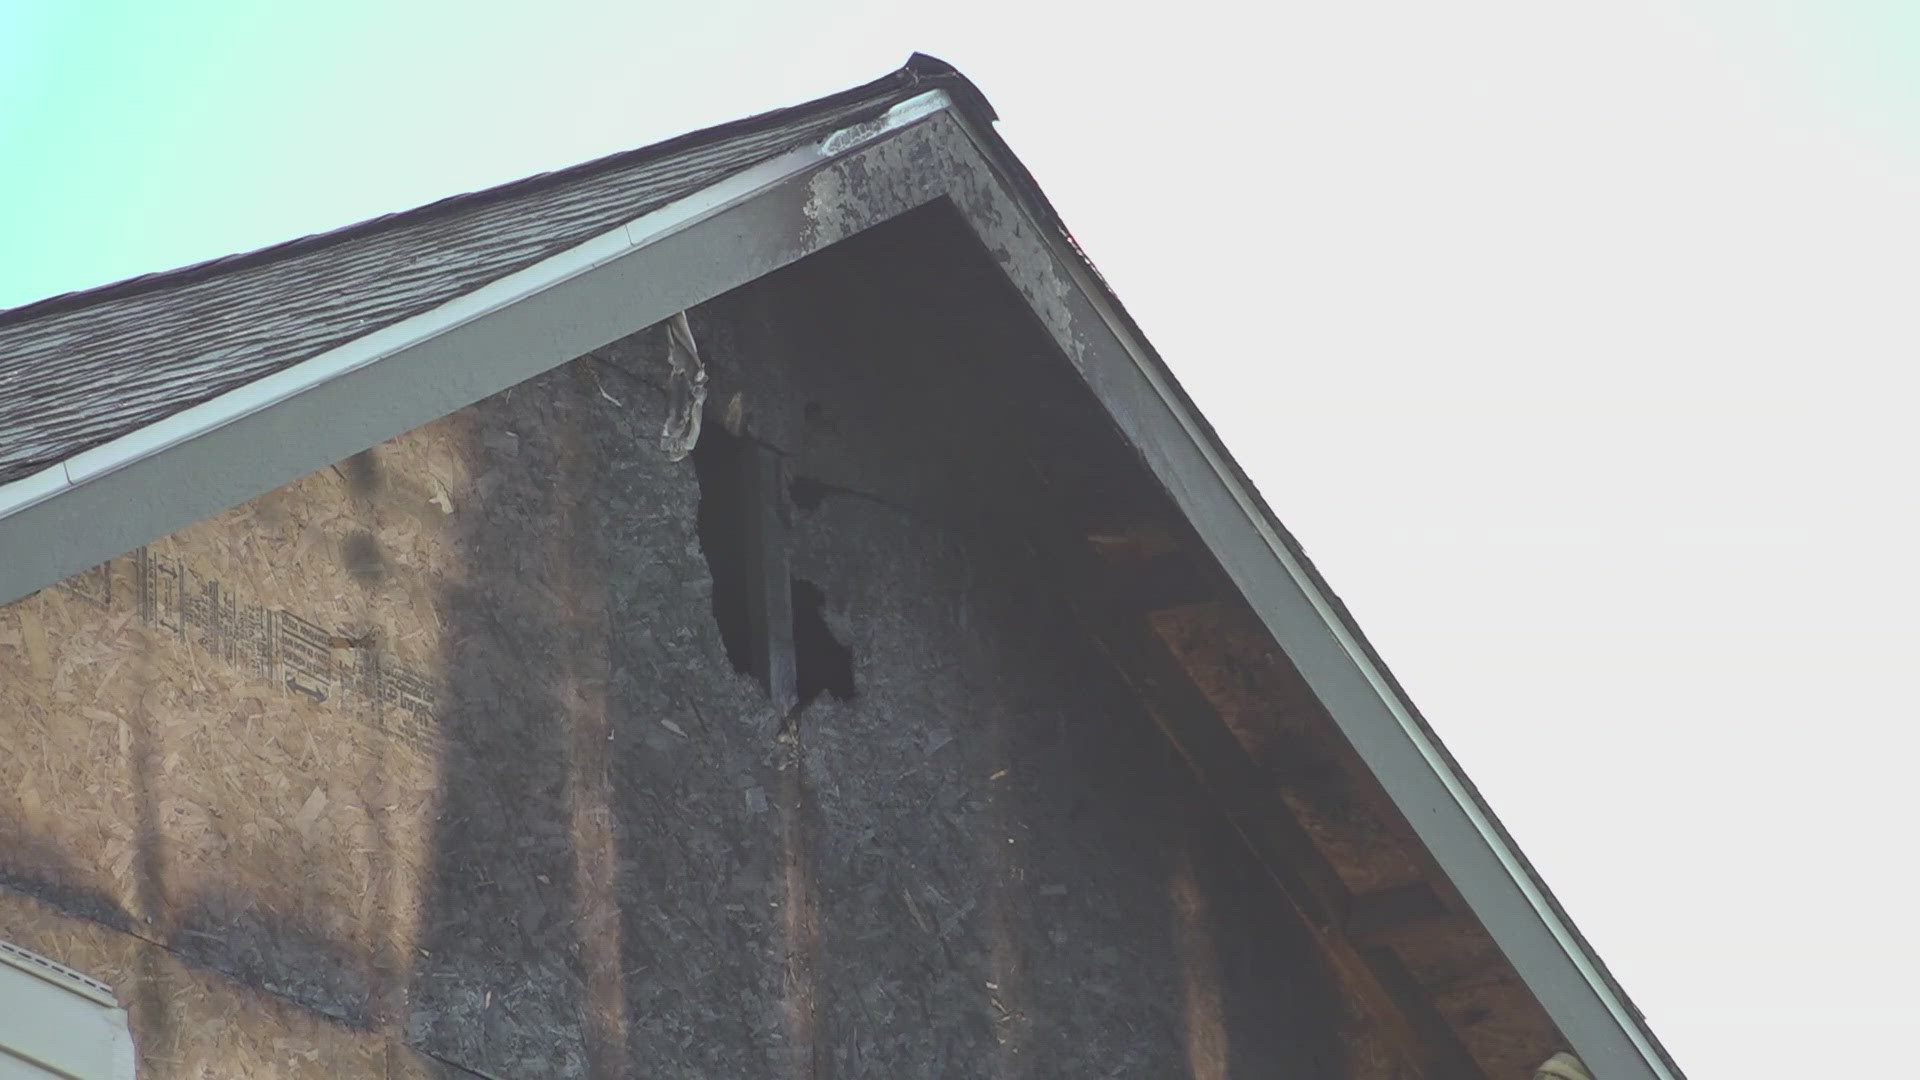 Apartment tenants feel uncertainty after being displaced by a fire, that injured two people.